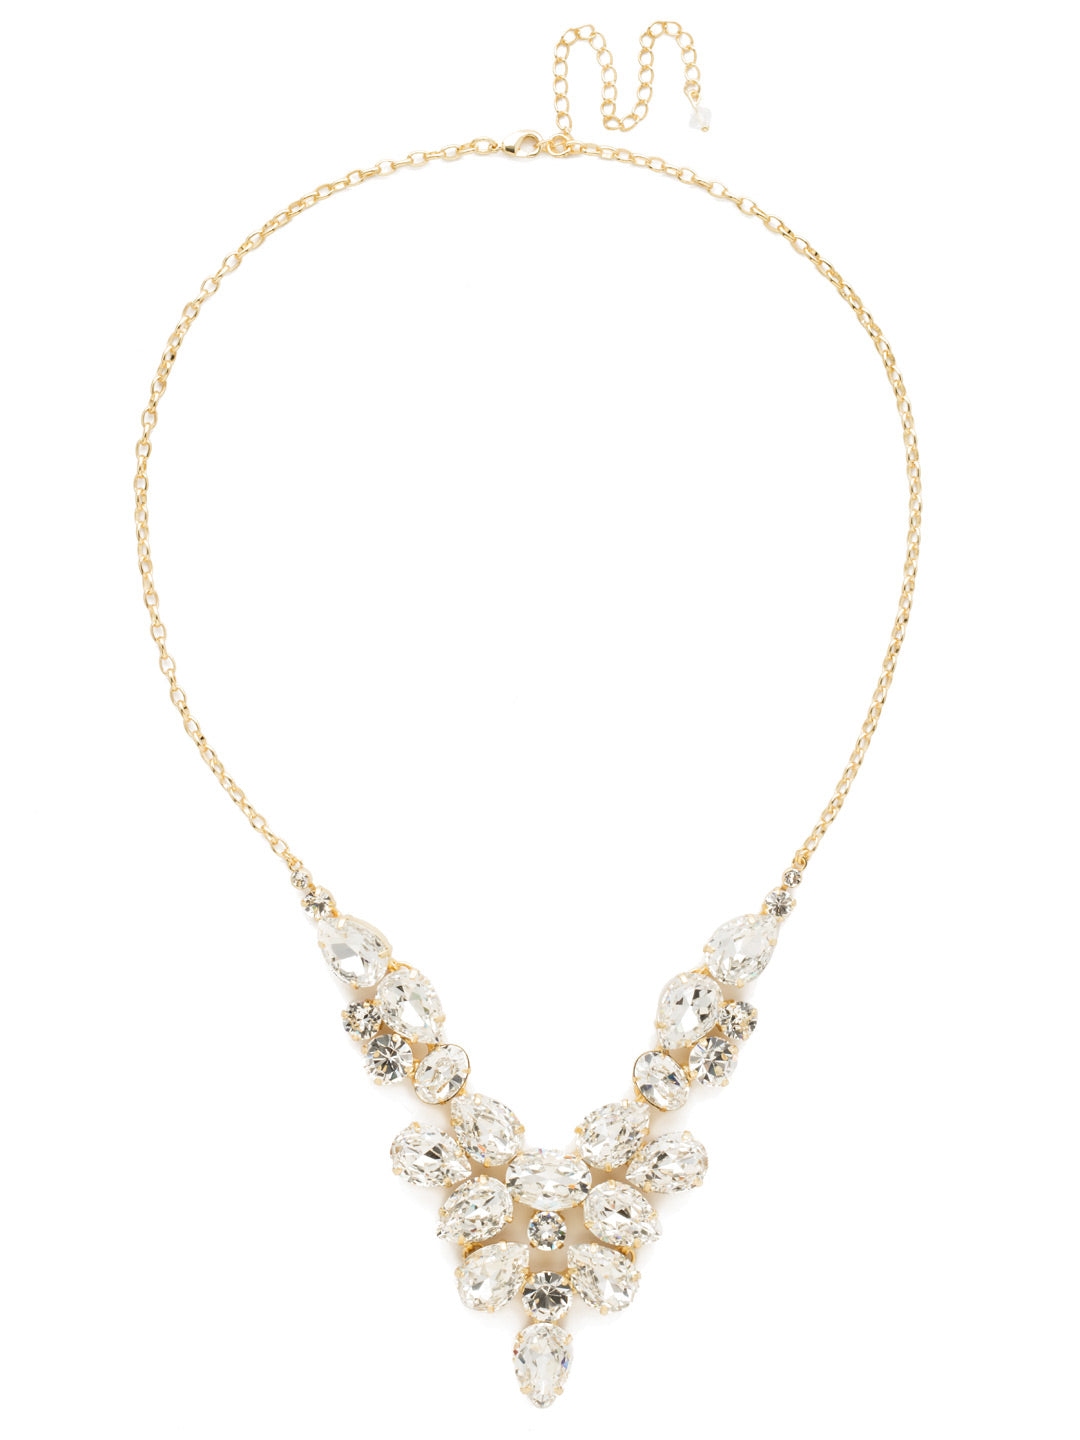 Chambray Statement Necklace - NDE59BGCRY - <p>Our Chambray Statement Necklace has it all! Semi-precious stones sprinkled throughout clusters of round and pear-shaped crystals makes for an unforgettable bib necklace. From Sorrelli's Crystal collection in our Bright Gold-tone finish.</p>